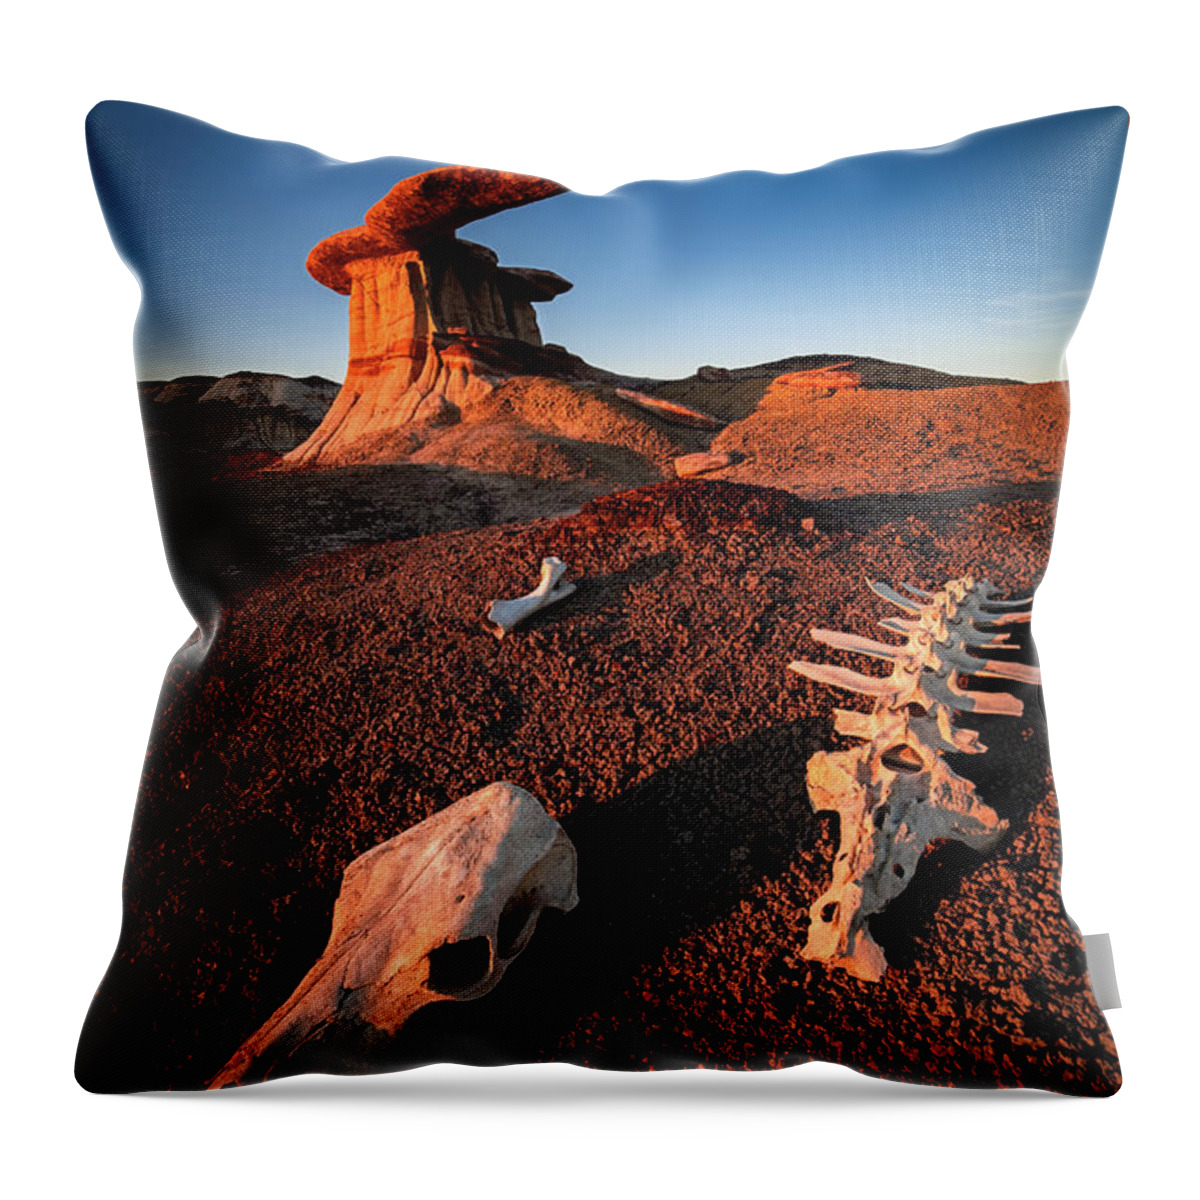 Amaizing Throw Pillow featuring the photograph Wild Wild West by Edgars Erglis